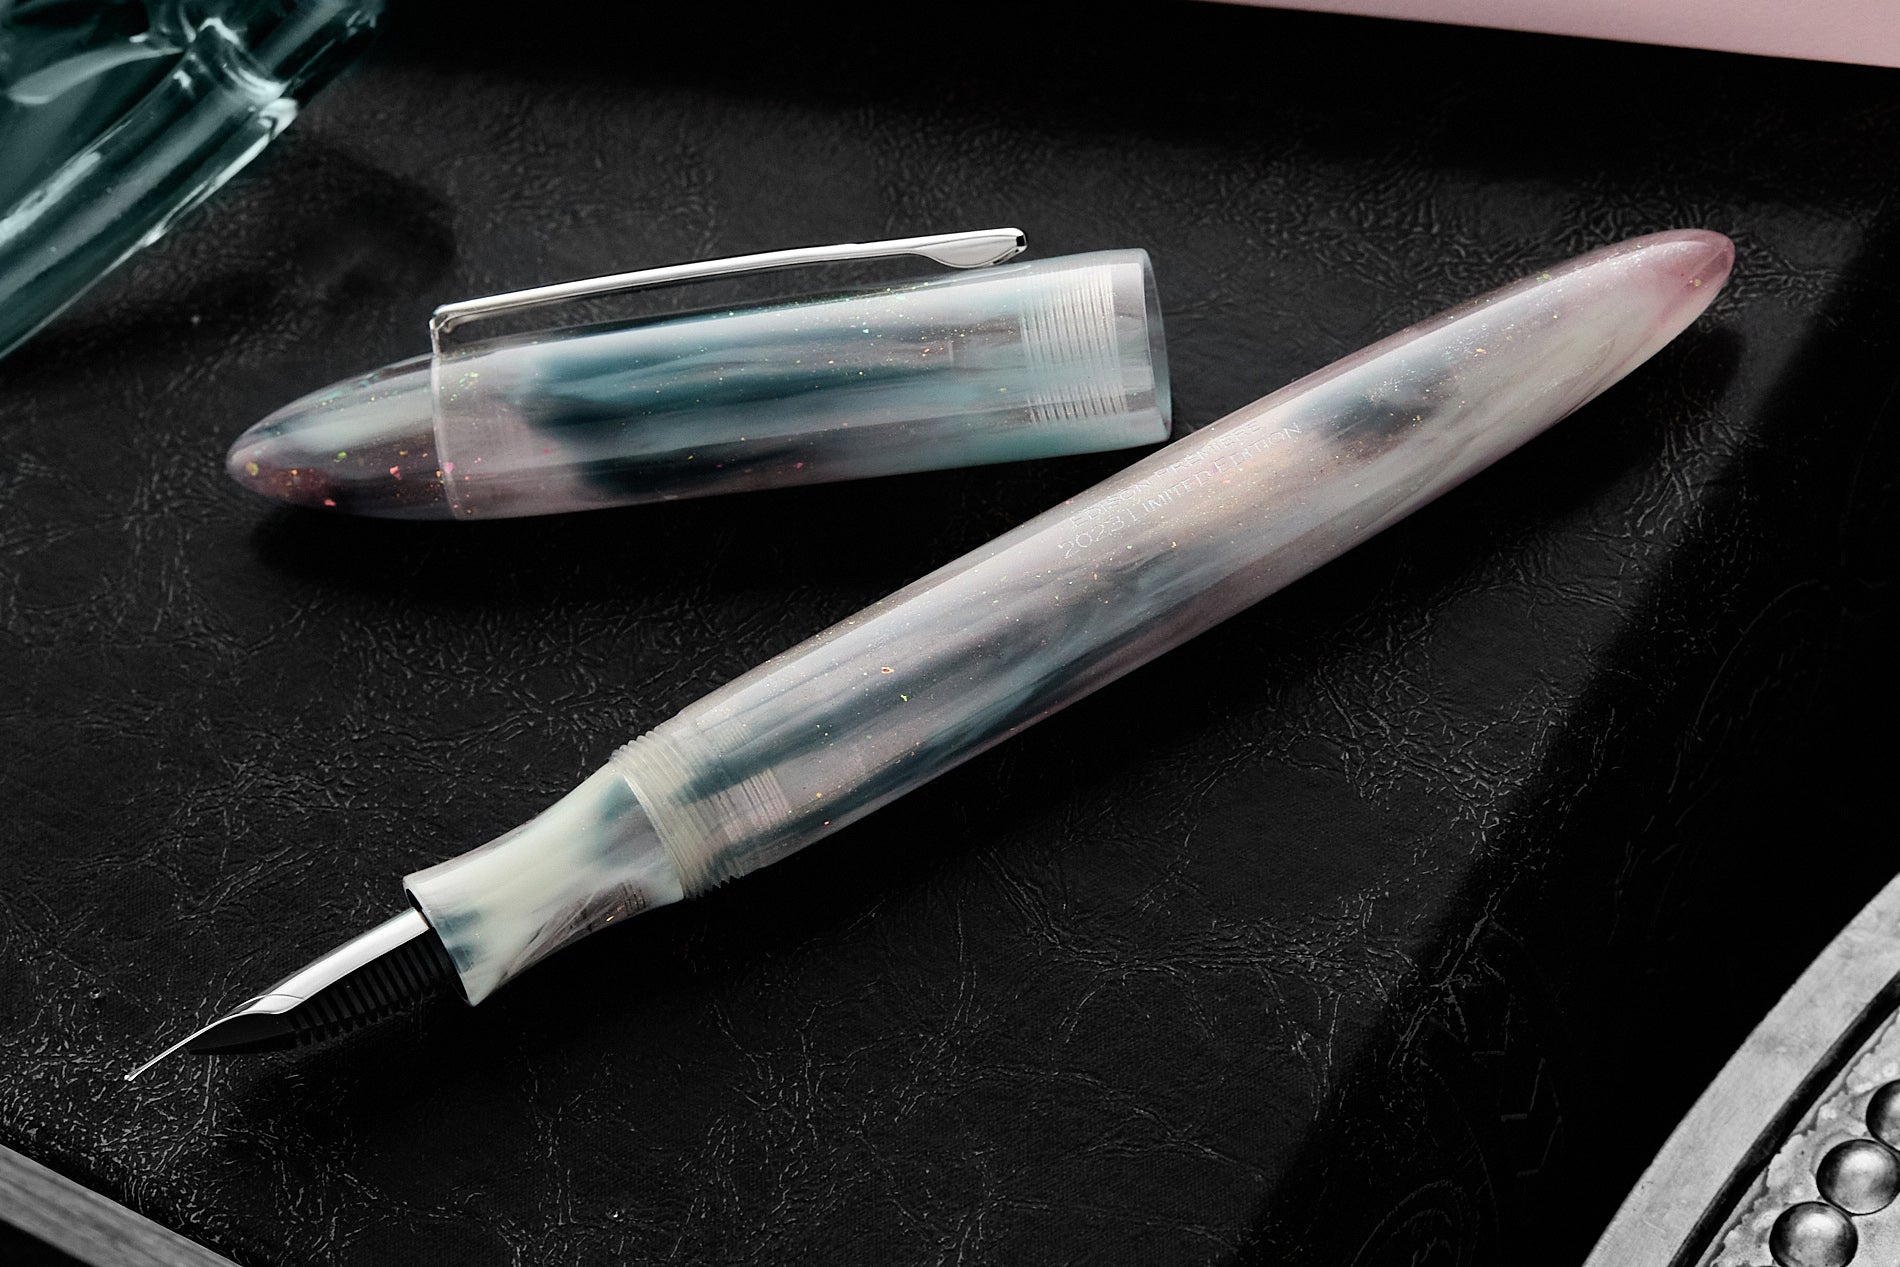 Edison foutnain pen in pale pink, blue, gray and glittery swirly resin, uncapped, on black background